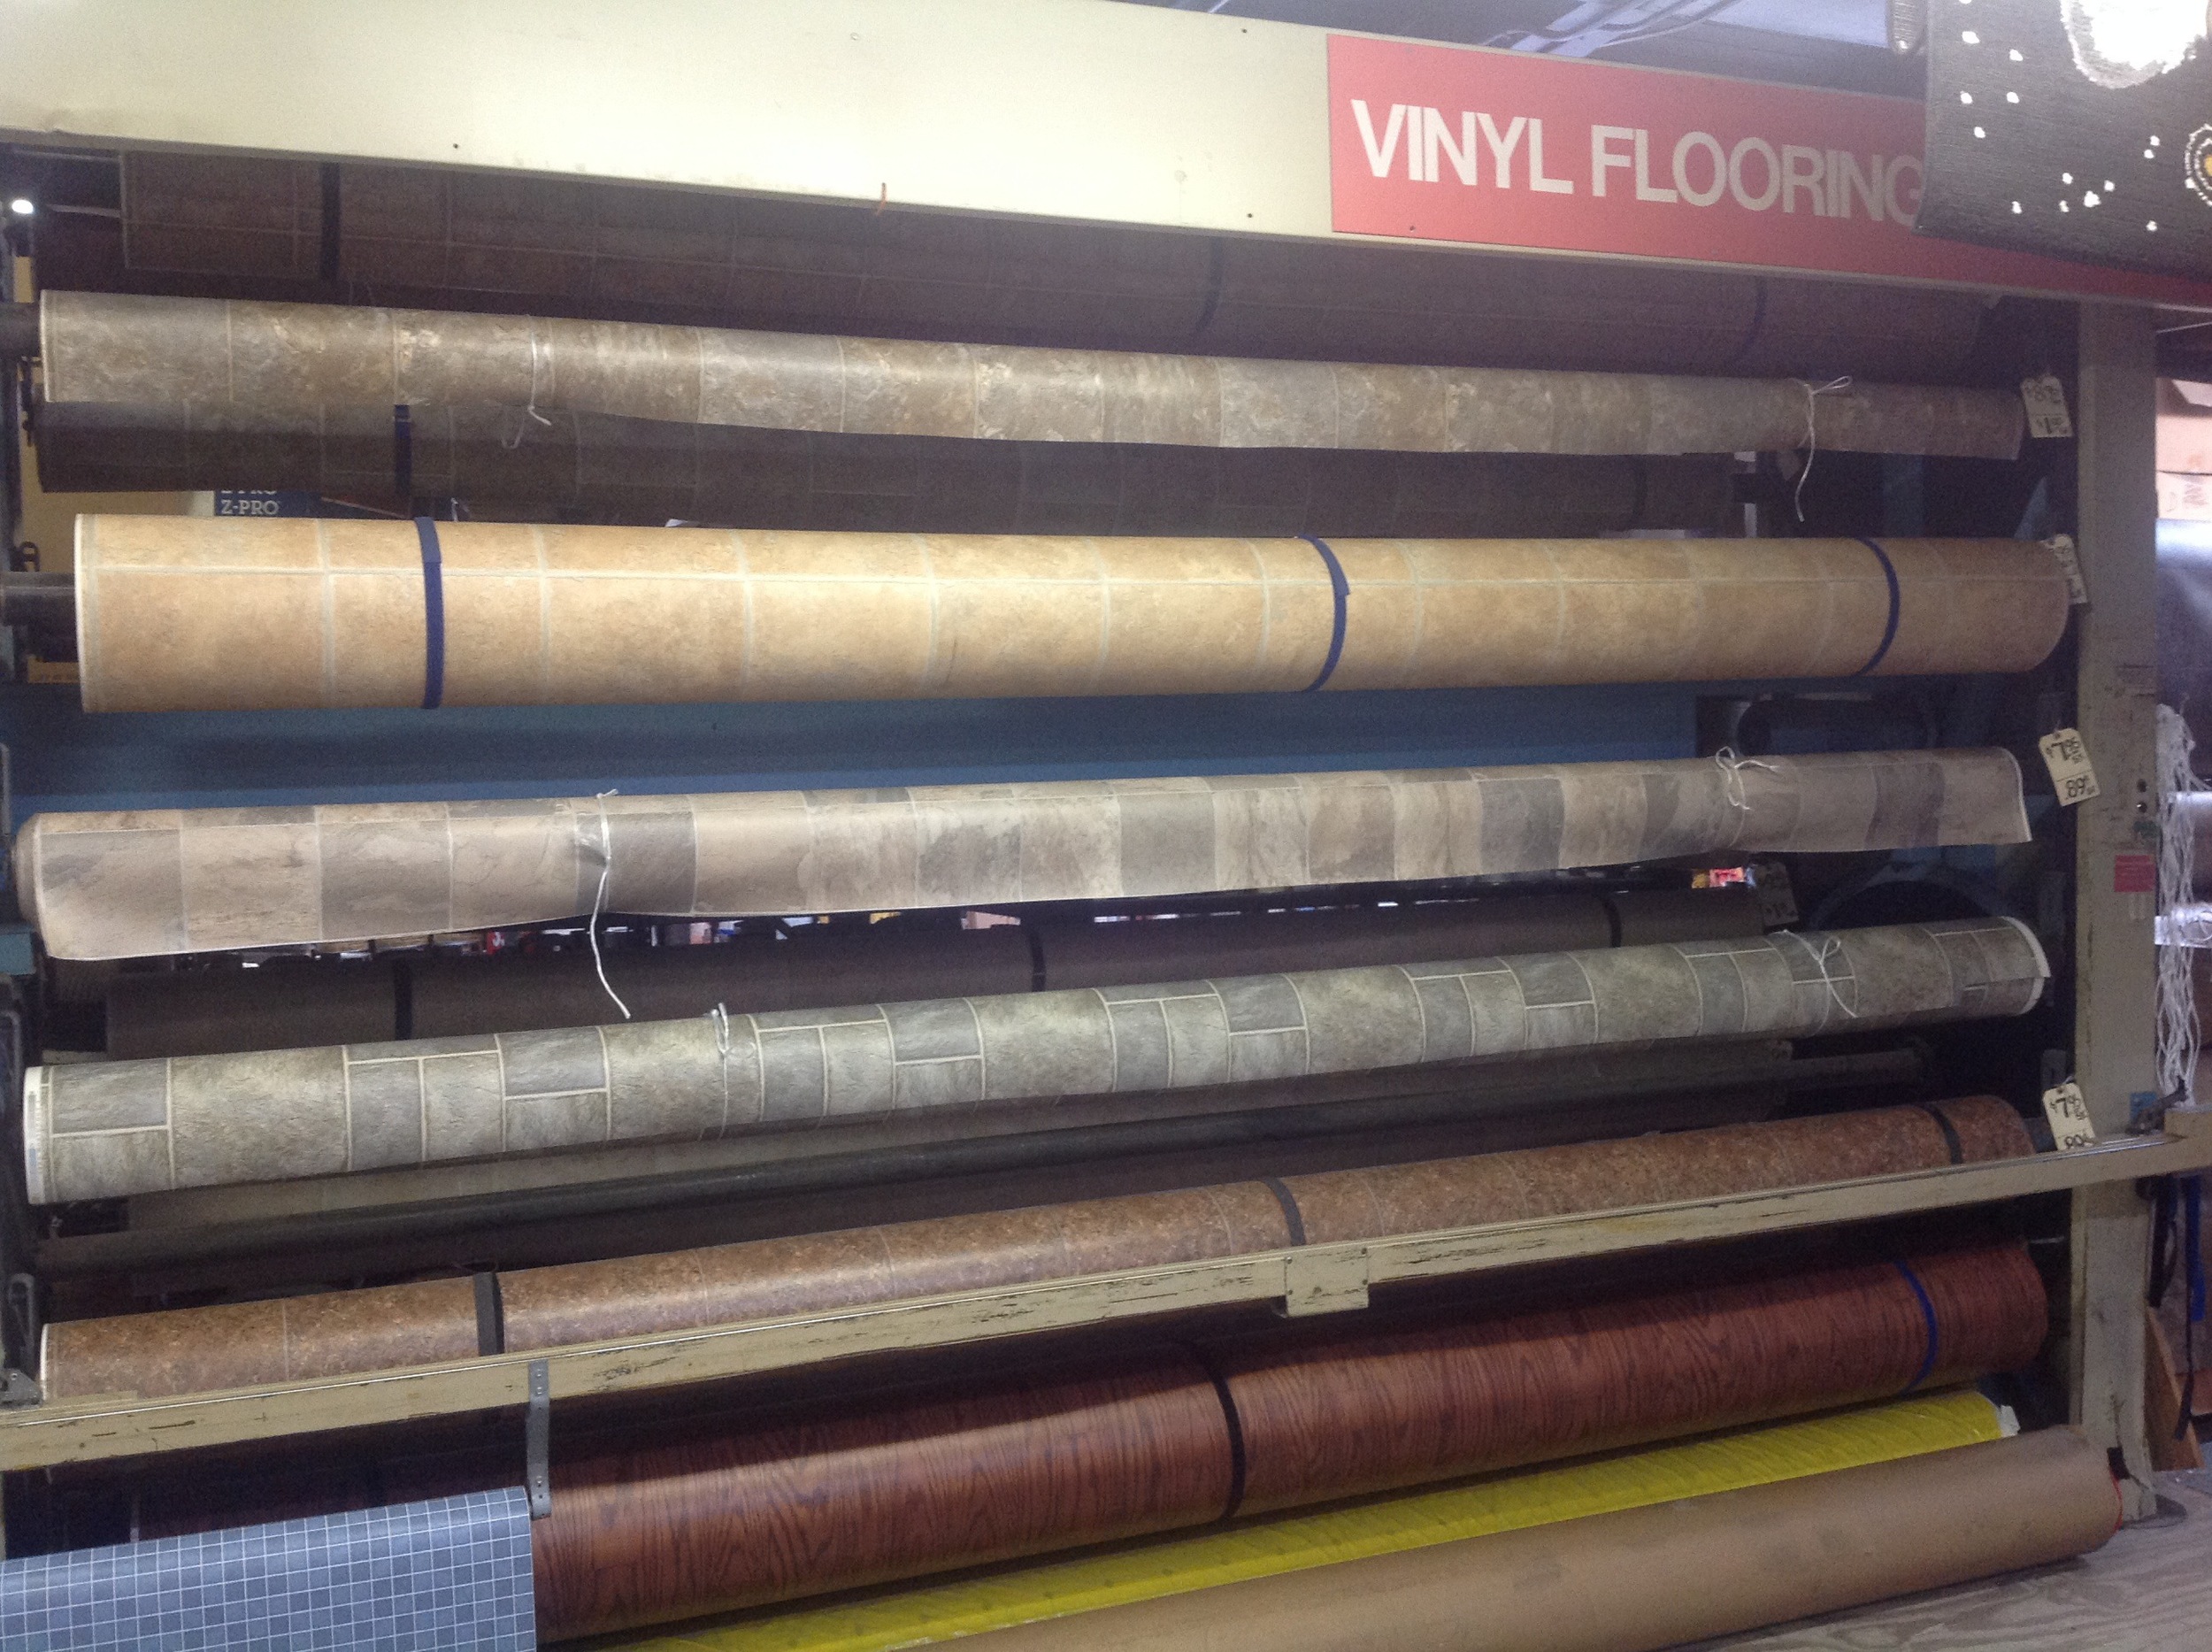 In Stock Linoleum - starting at only 45 cents/s.f.